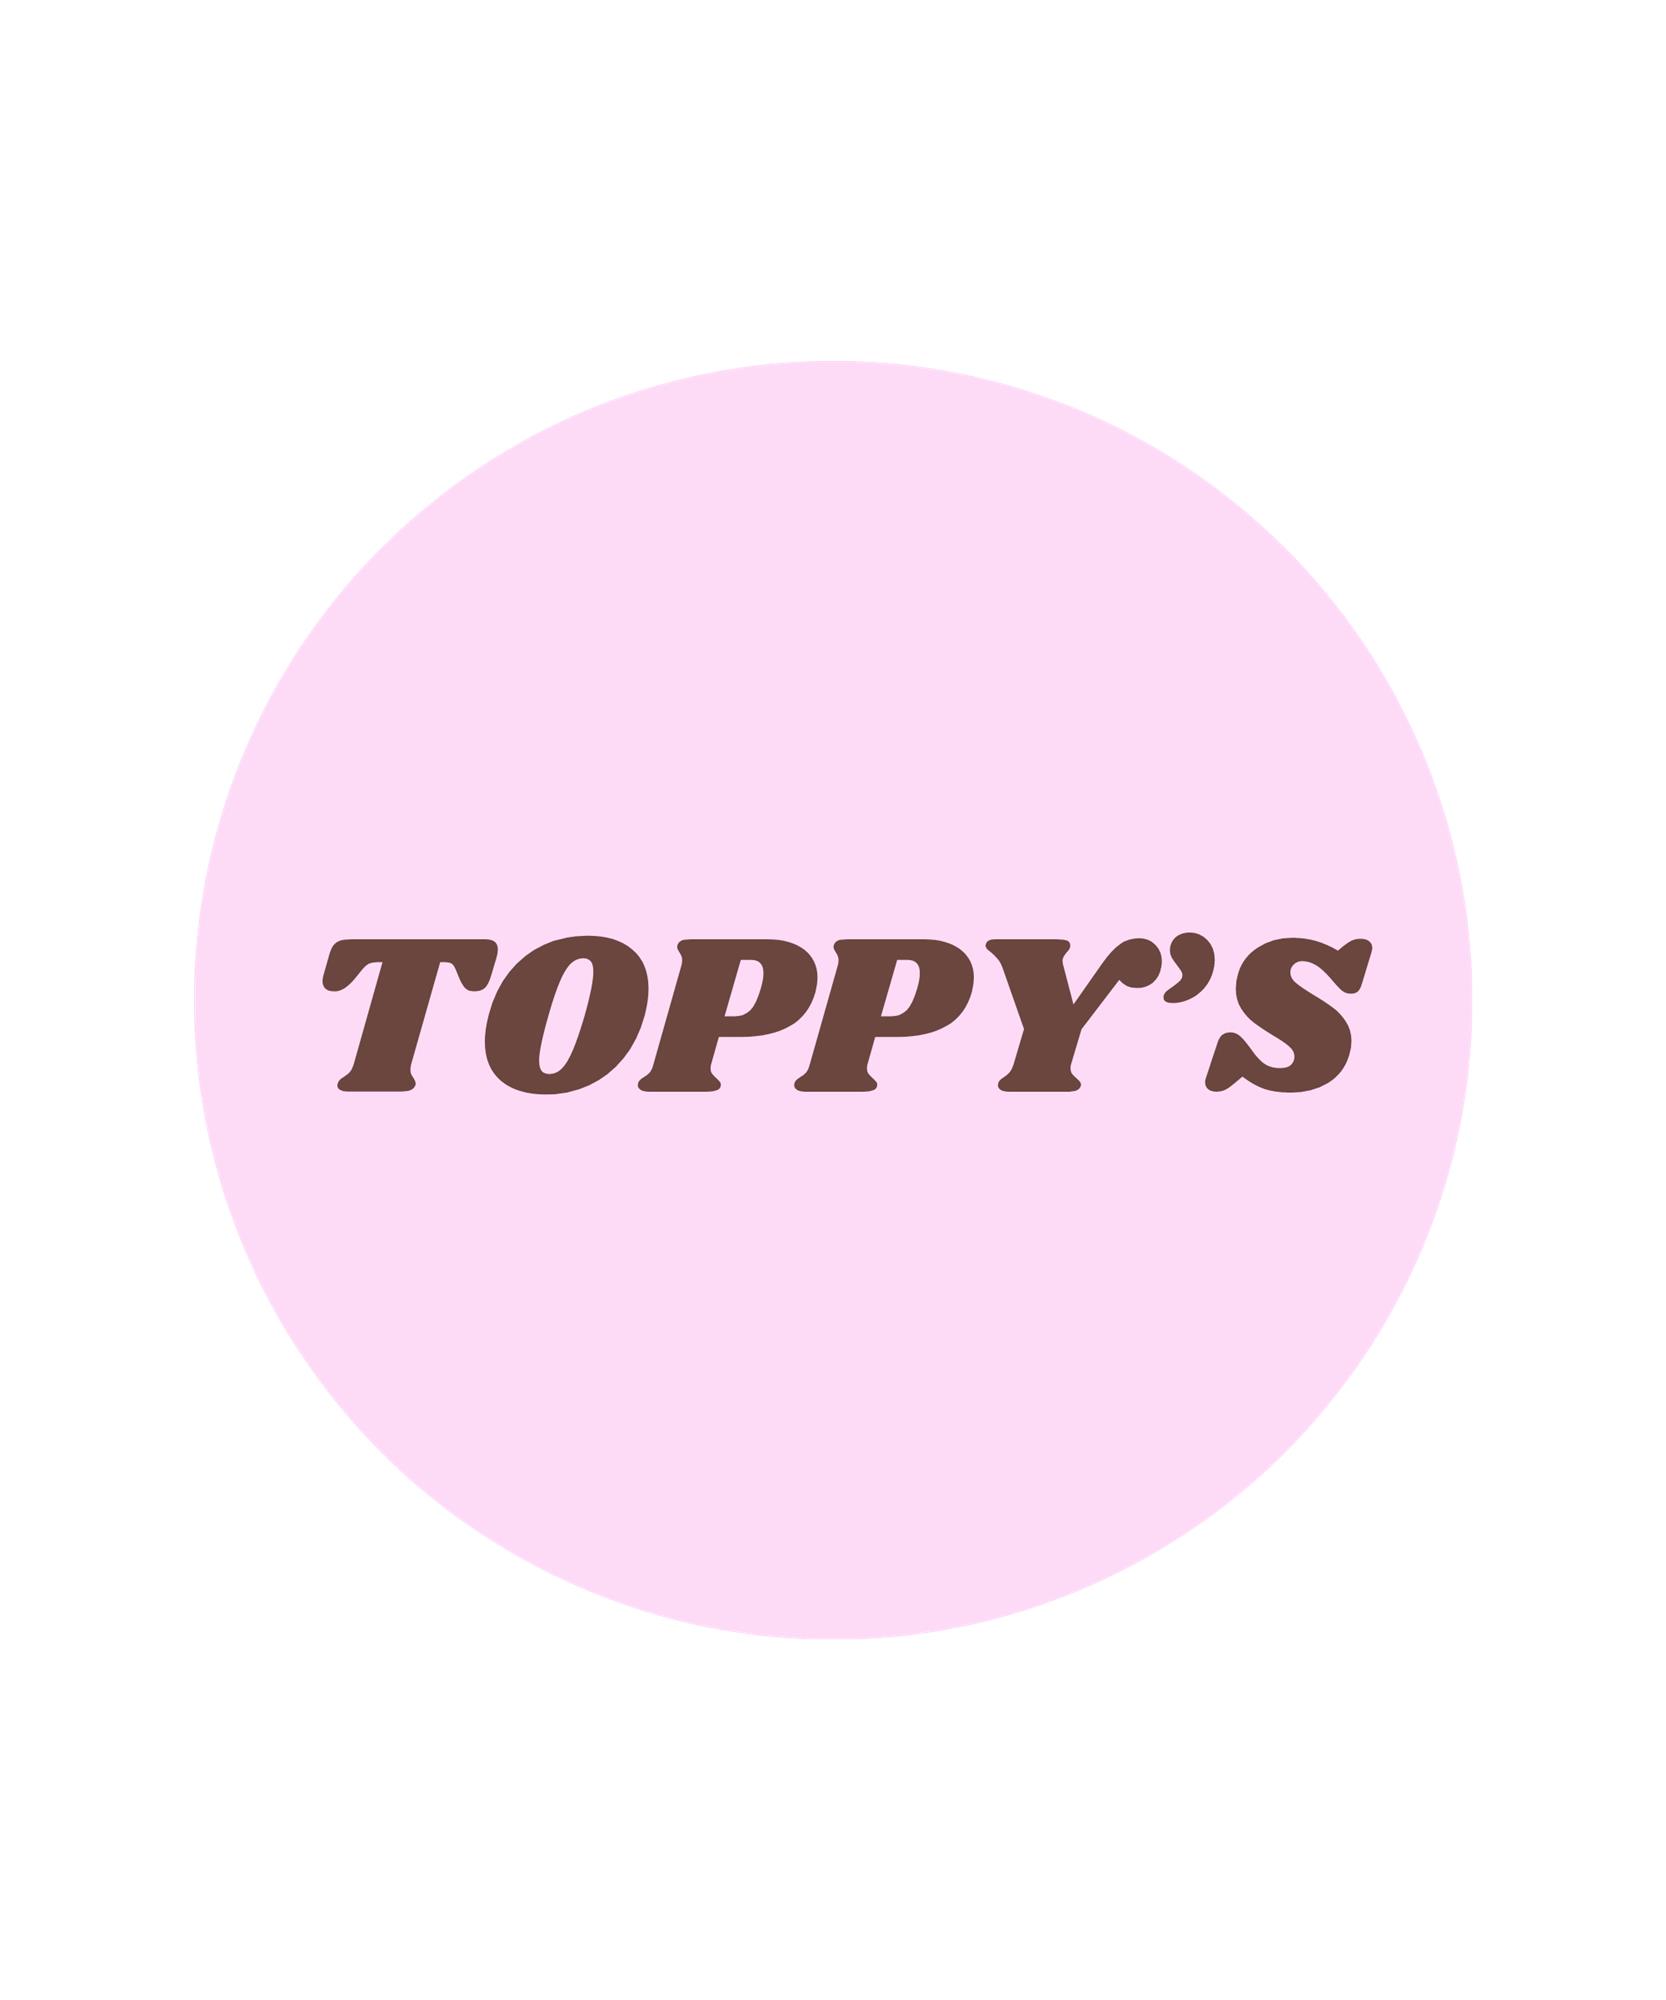 In Partnership with toppysgoods.com